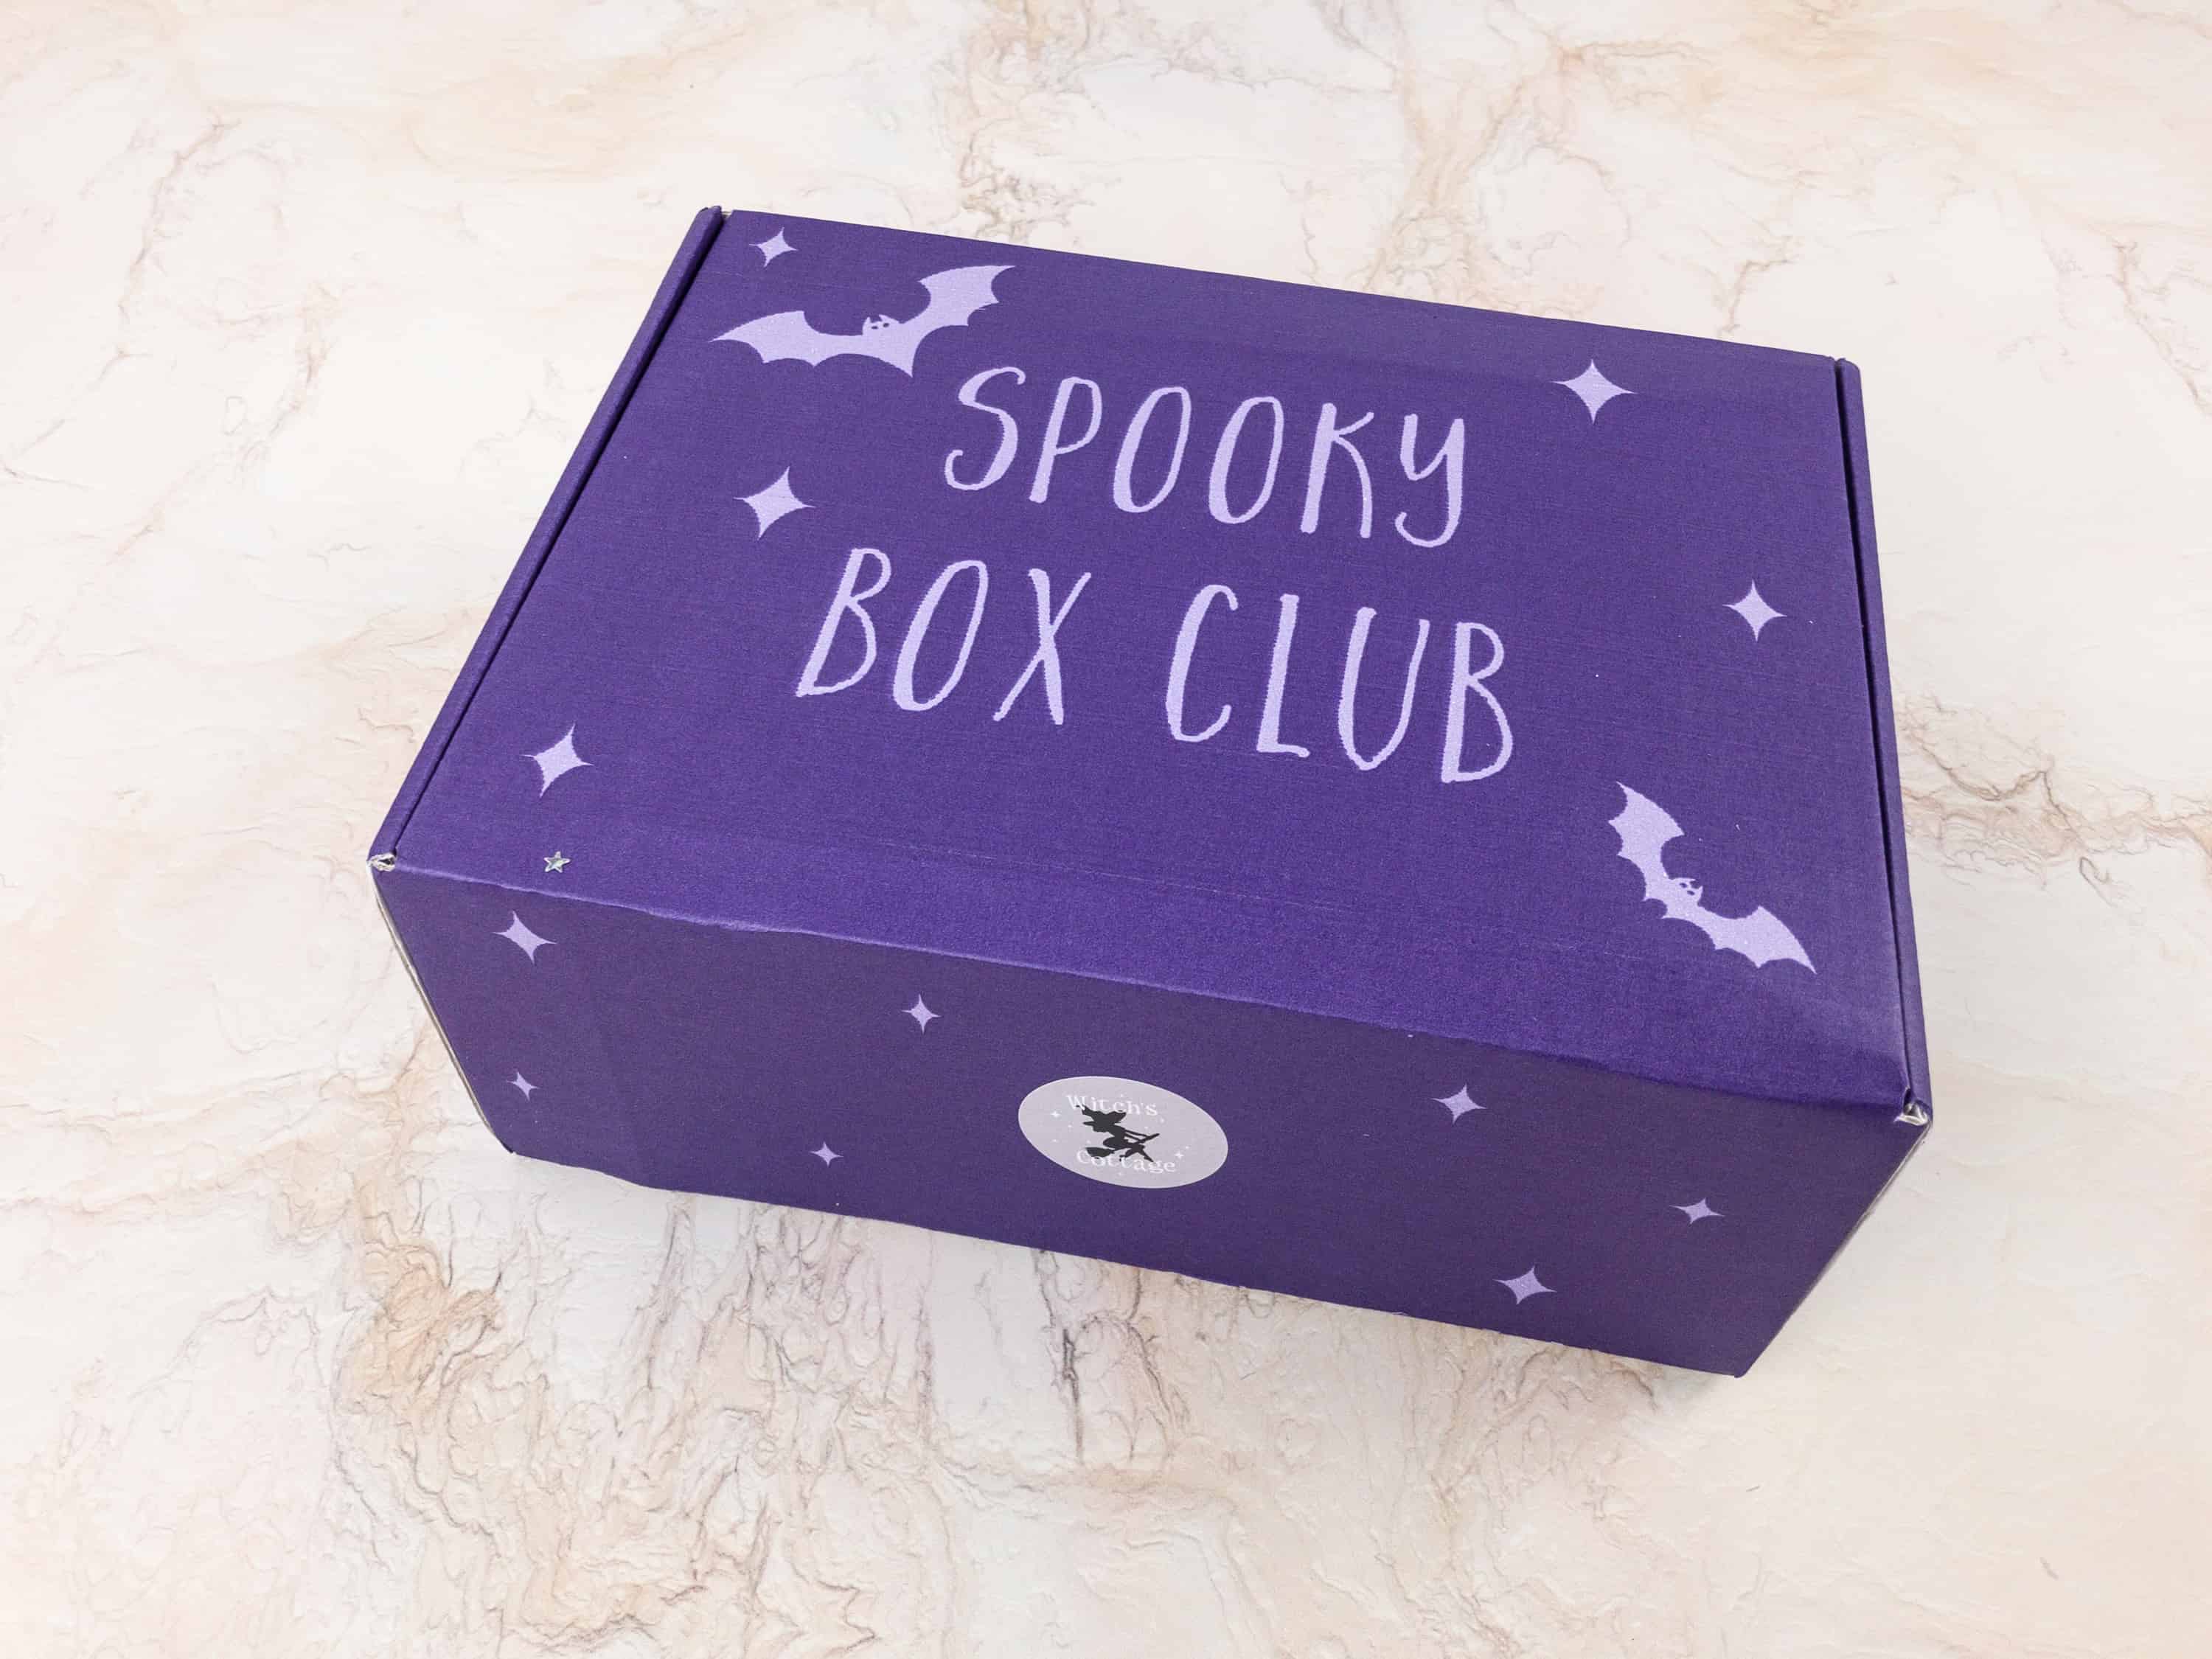 Spooky Box Club Subscription Box Review Witch's Cottage Hello